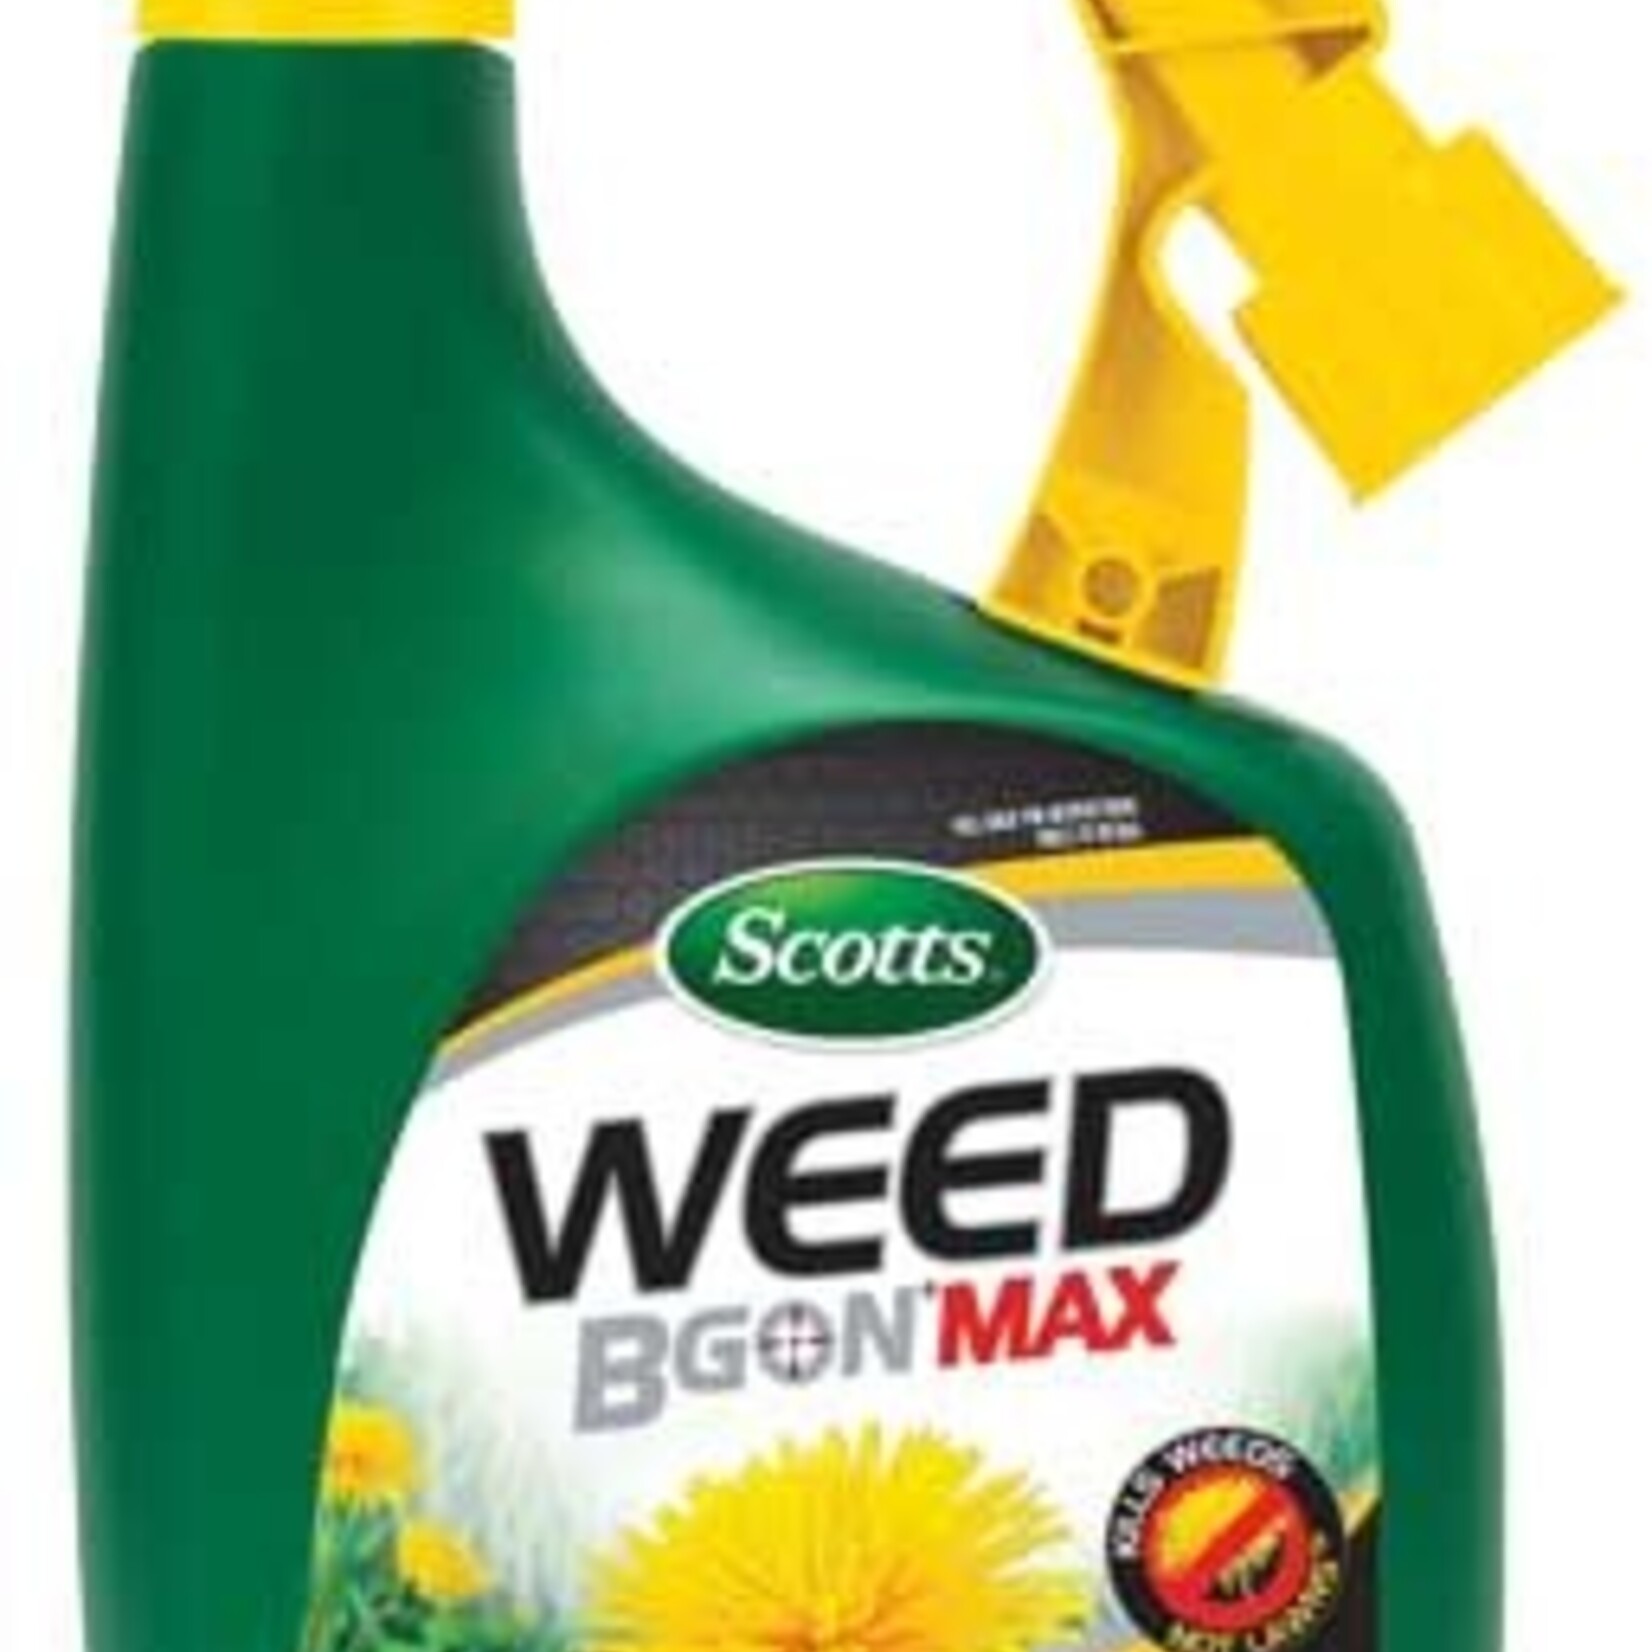 Scotts Scotts Weed B Gon Max Ready-To-Spray Weed Control for Lawns - 1L - Case